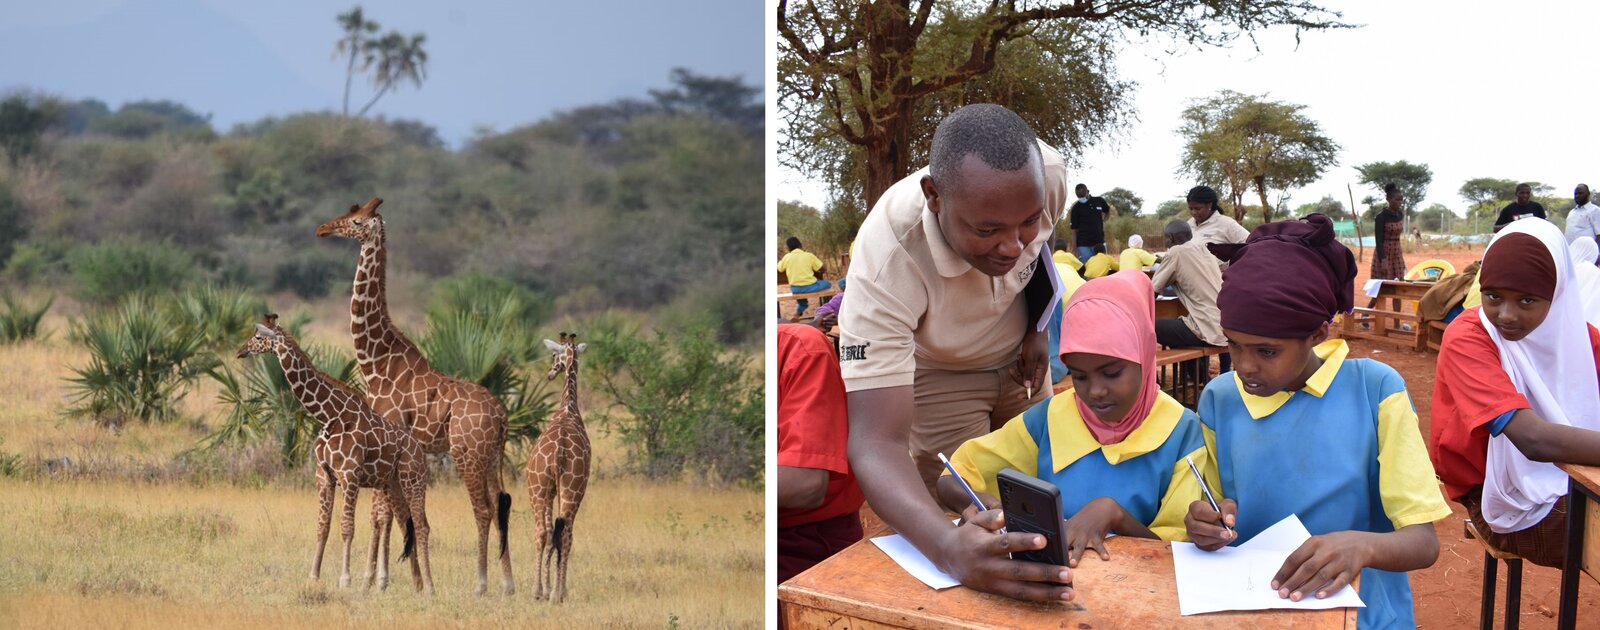 Two photos side by side. One of a family of wild giraffe in the savannah and another of a group of school children in Kenya taking part in Born Free activities